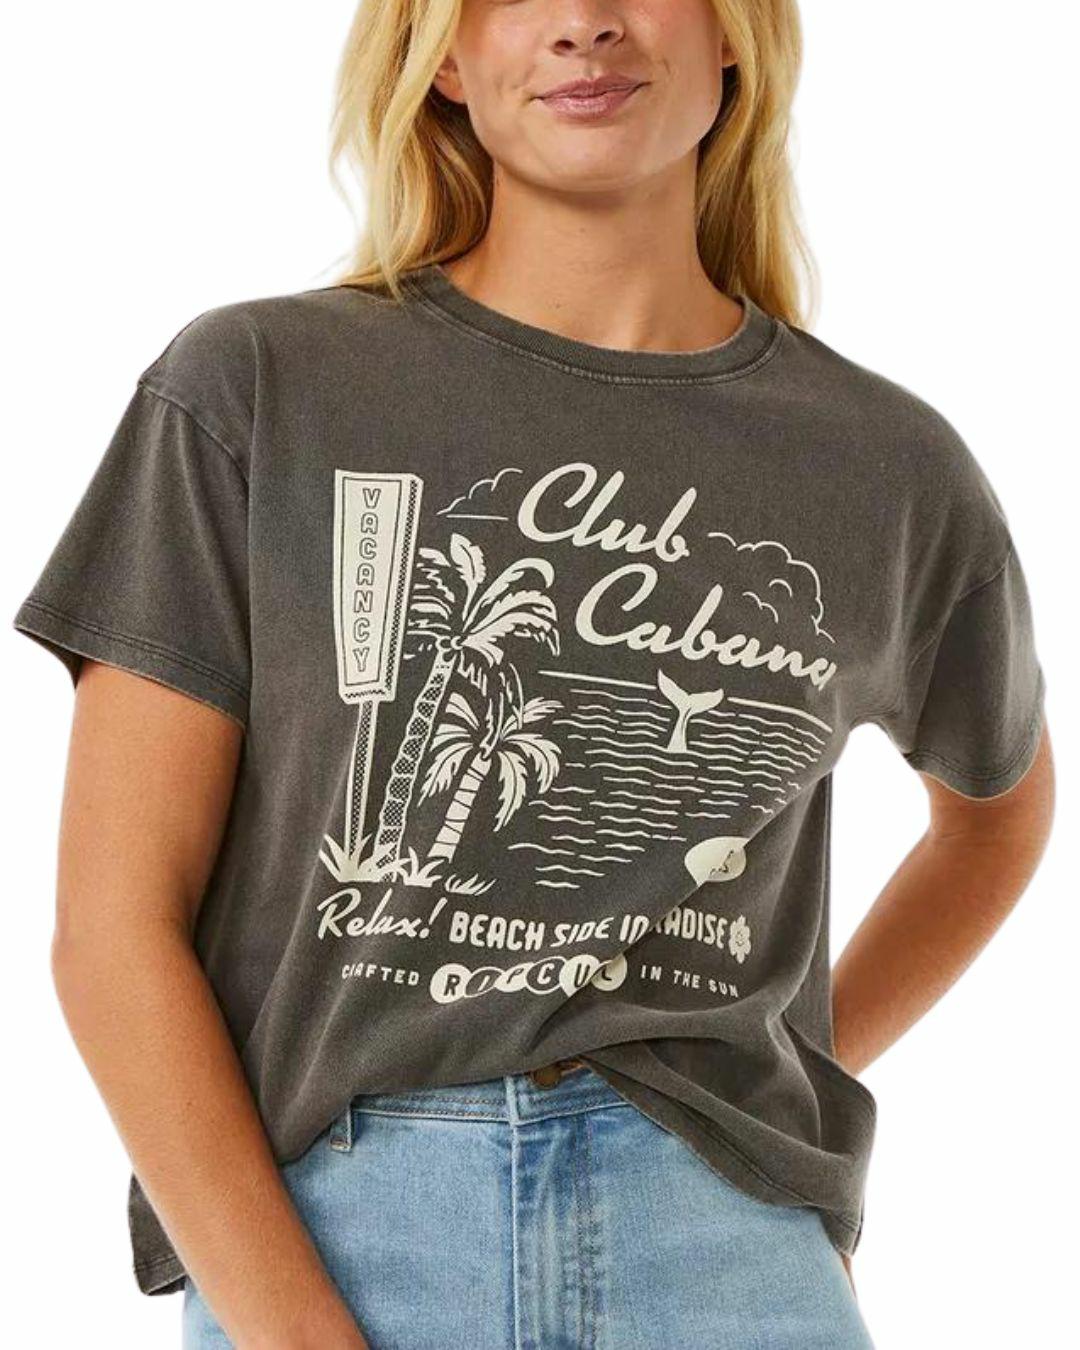 Club Cabana Relaxed Tee Womens Tee Shirts Colour is Wsh Blk